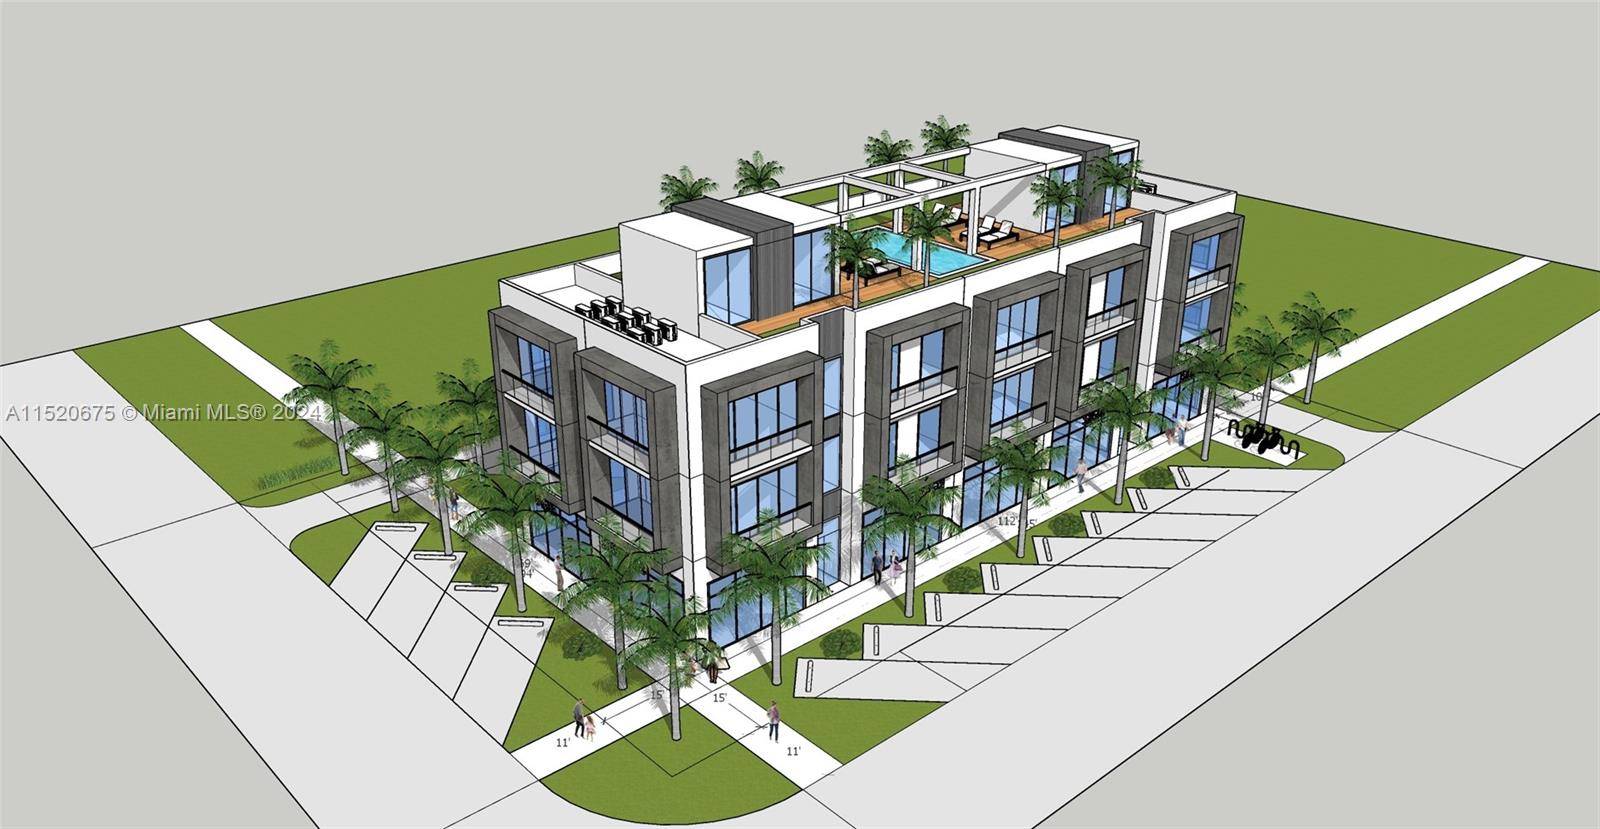 Development opportunity in the heart of Oakland Park to purchase two folios, including the corner, with a potential build of 14 dwellings, up to 4 6 stories with commission approval ...